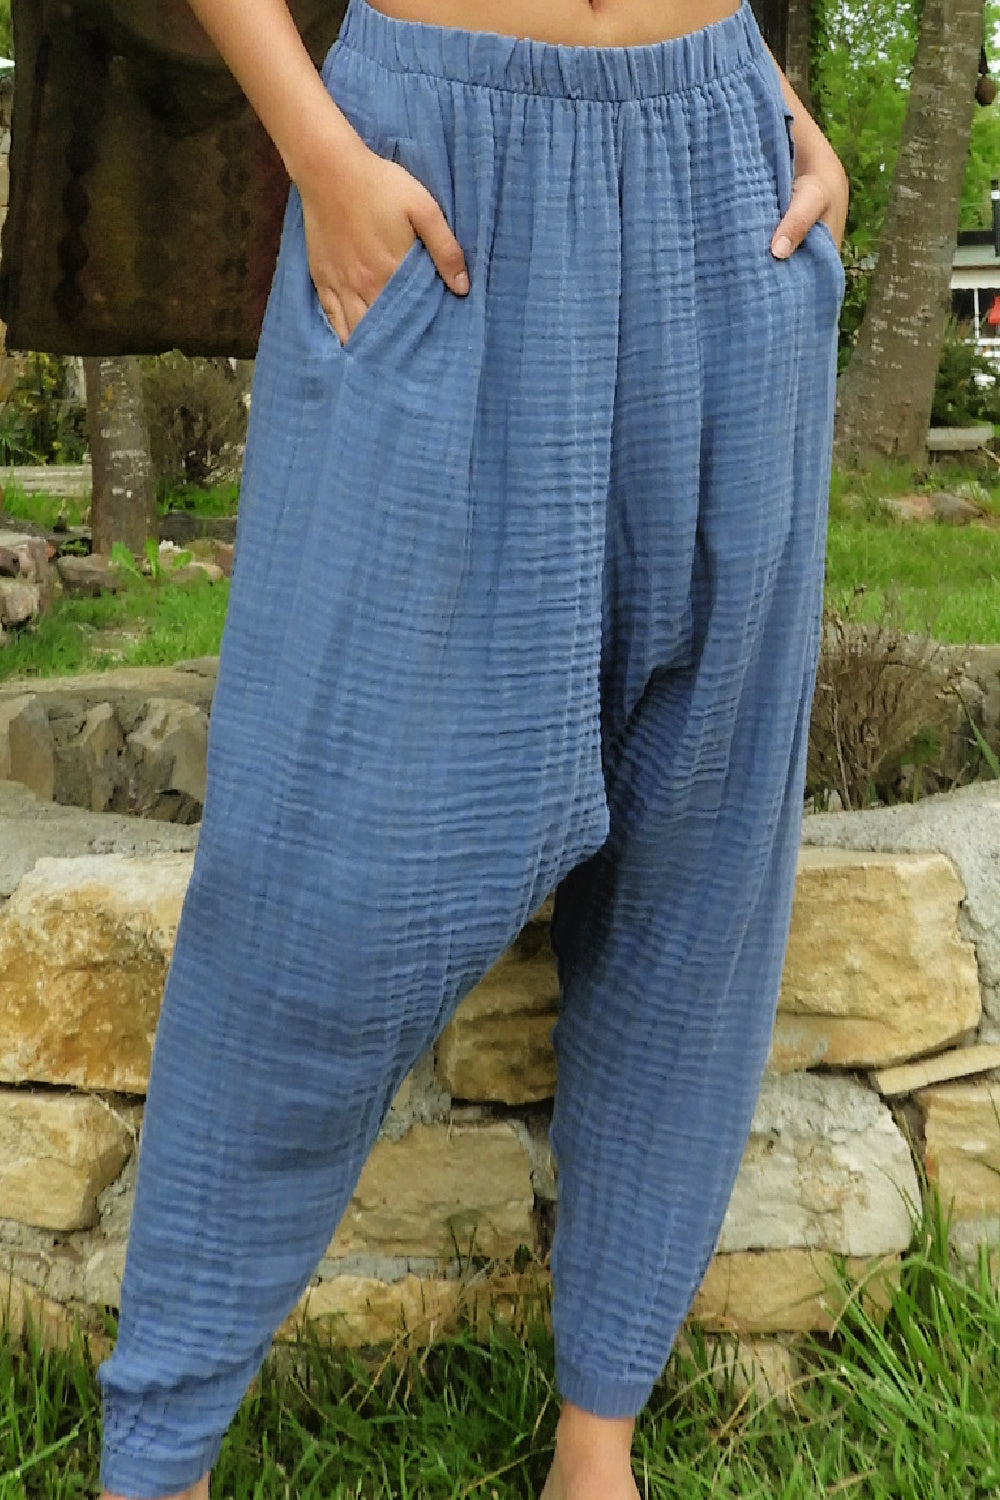 Shop Now for Comfortable and Chic Women's Harem Pants